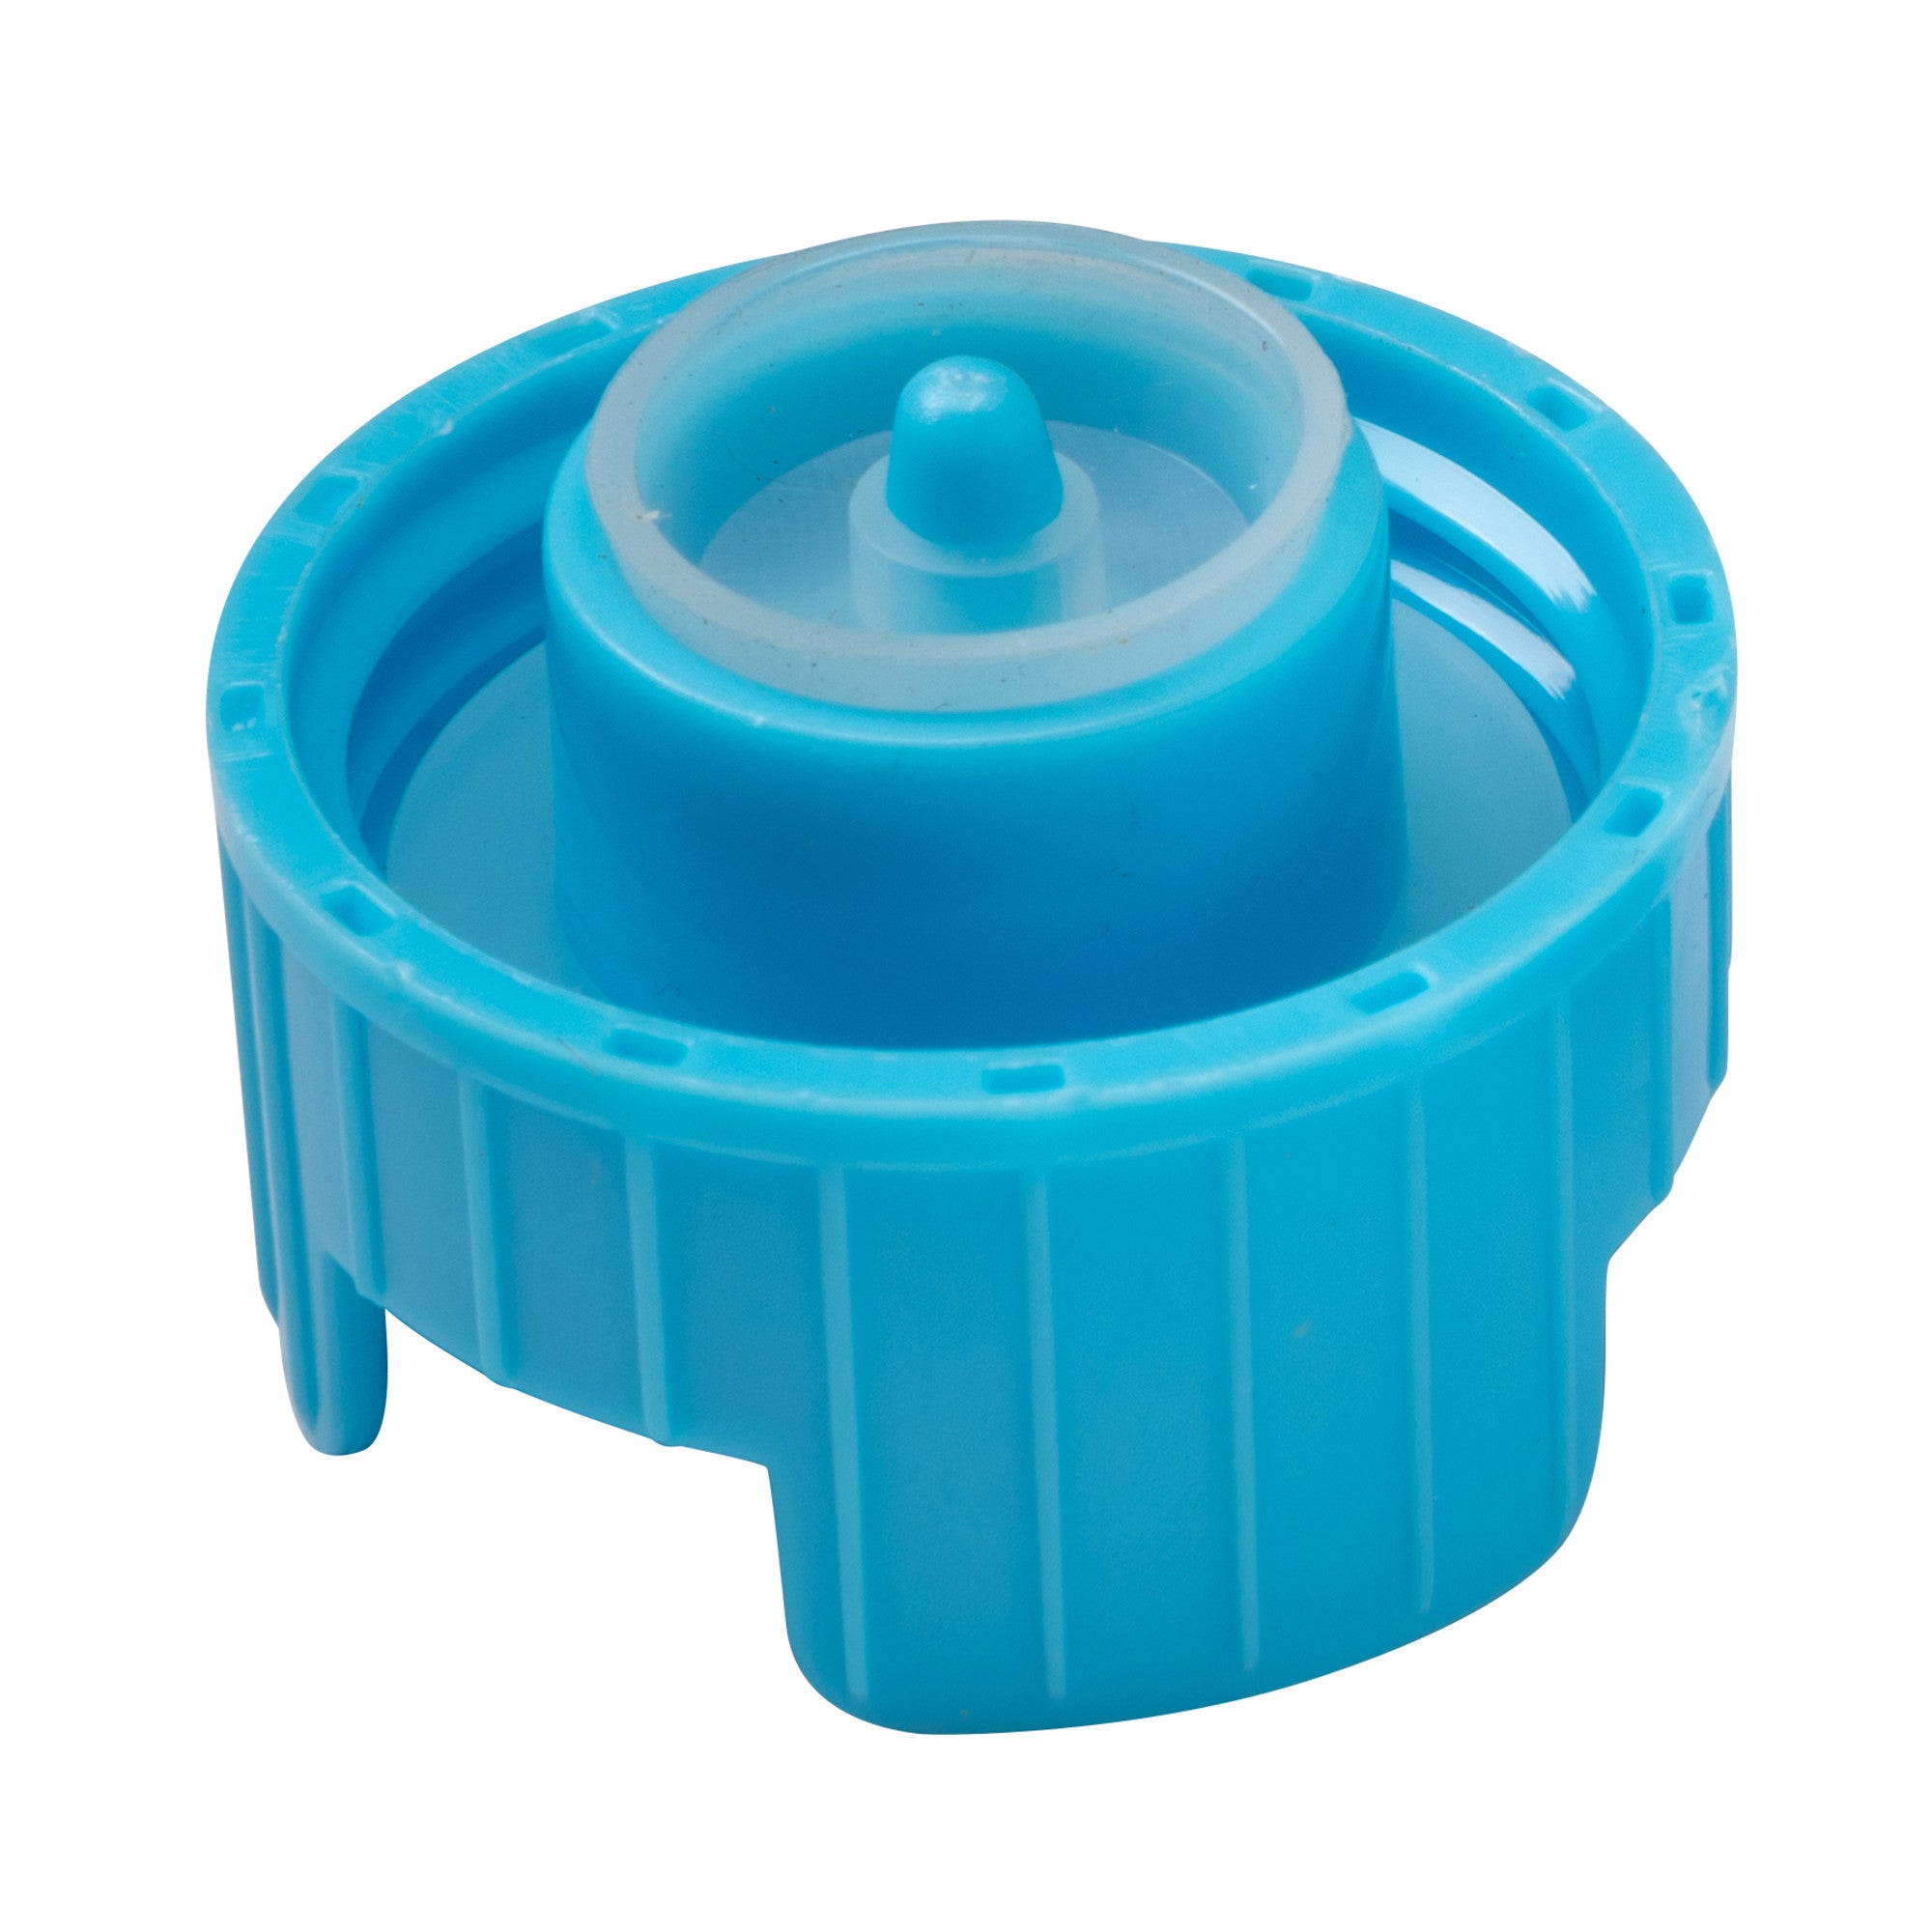 Filter Free Cool Mist Humidifier Replacement Tank Cap - Blue